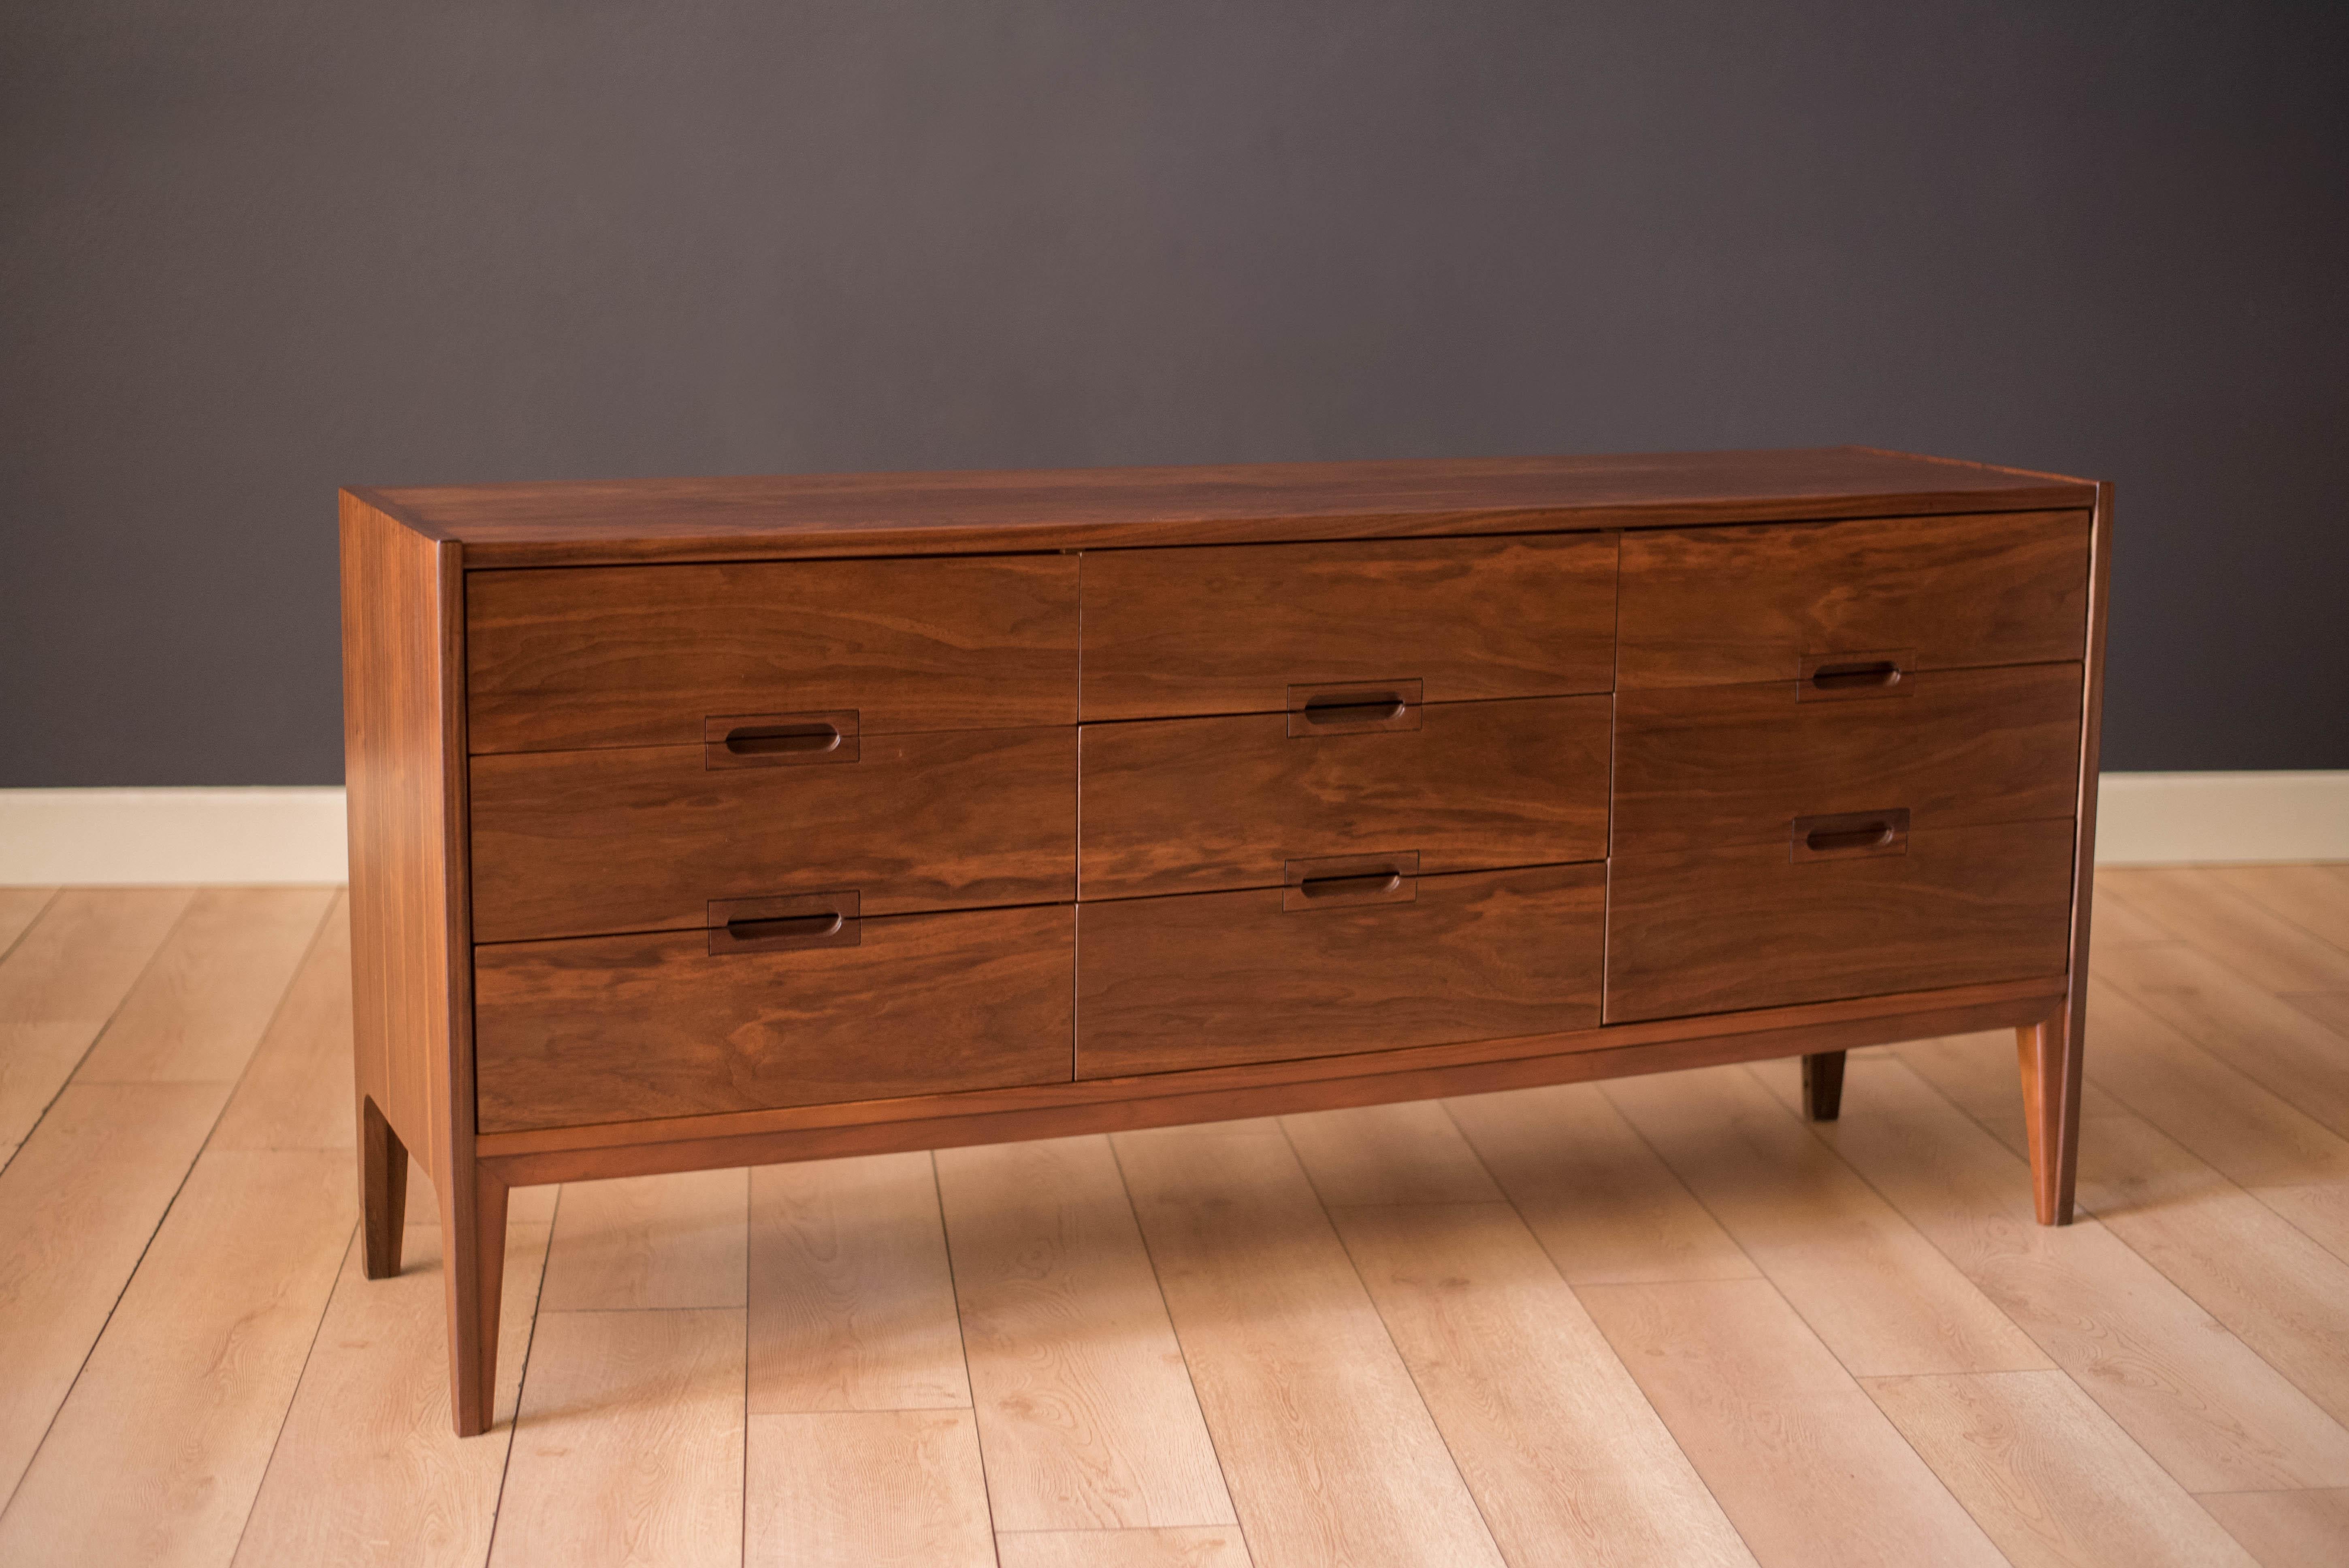 Vintage nine drawer dresser in walnut manufactured by United Furniture Corporation, c. 1960's. This piece features recessed handles and dovetailed drawer construction with deep storage space.